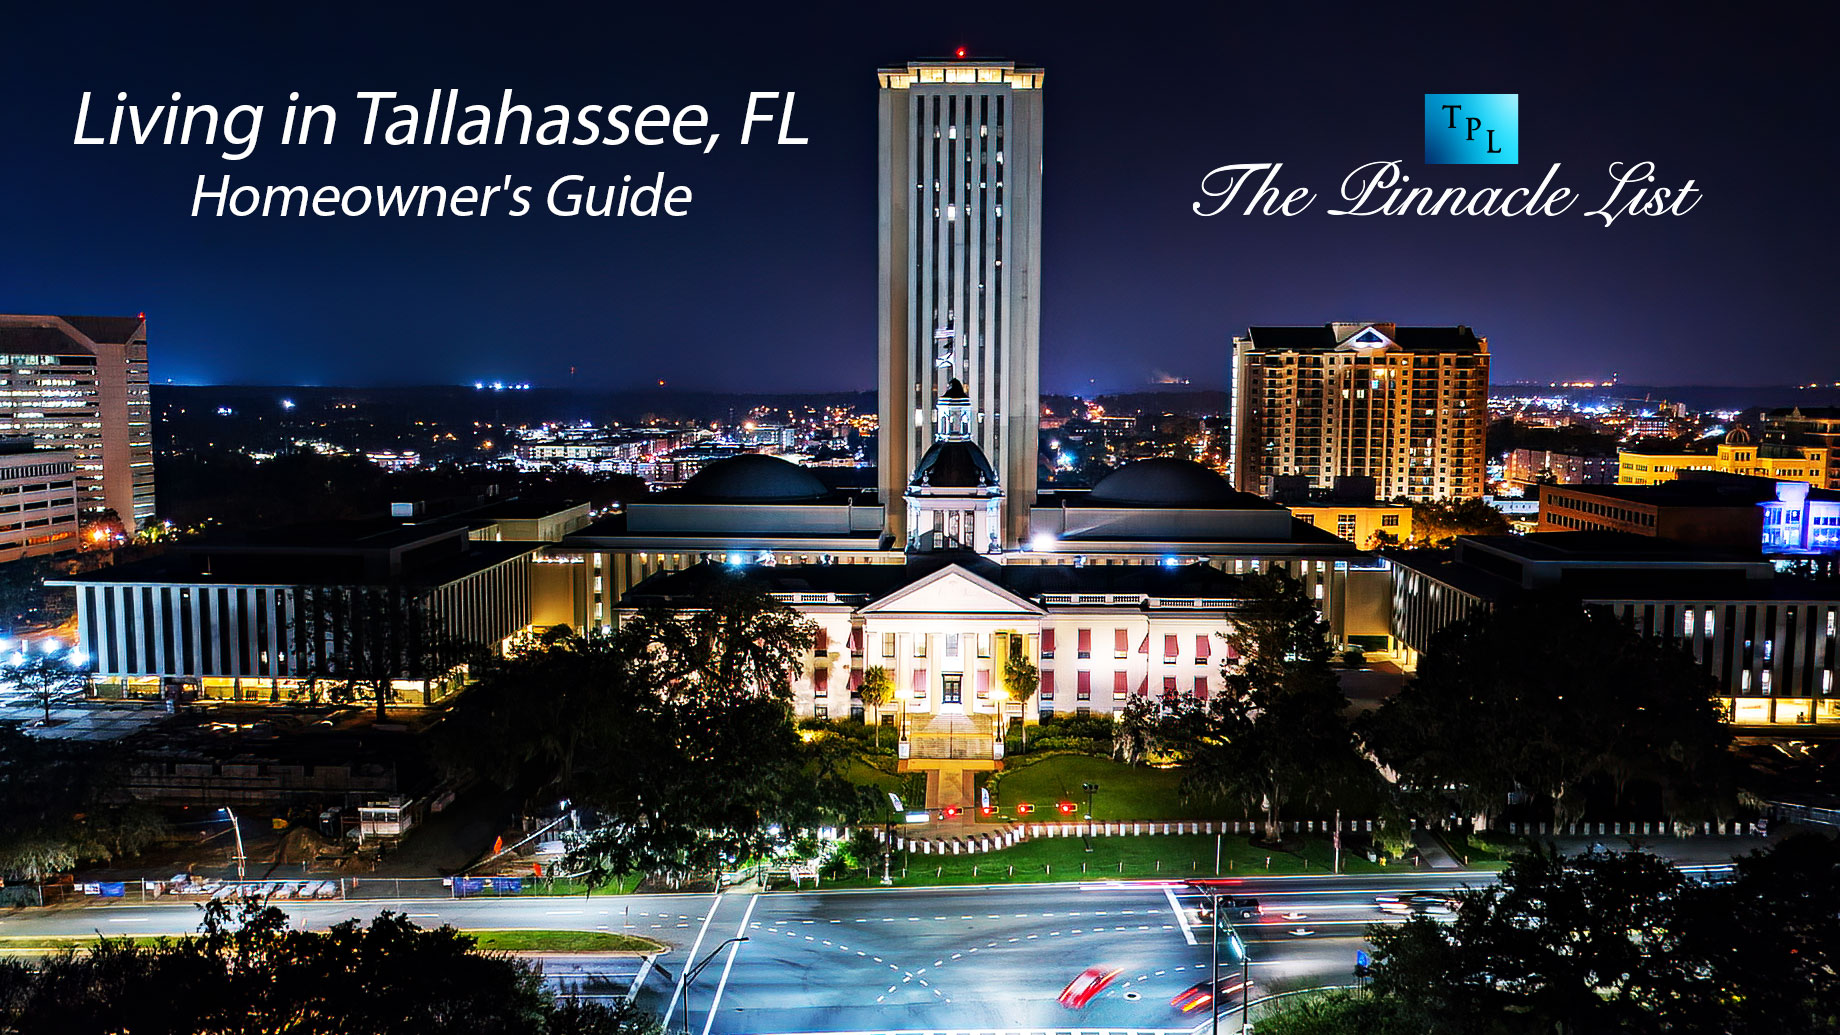 Living in Tallahassee, FL: Homeowner's Guide